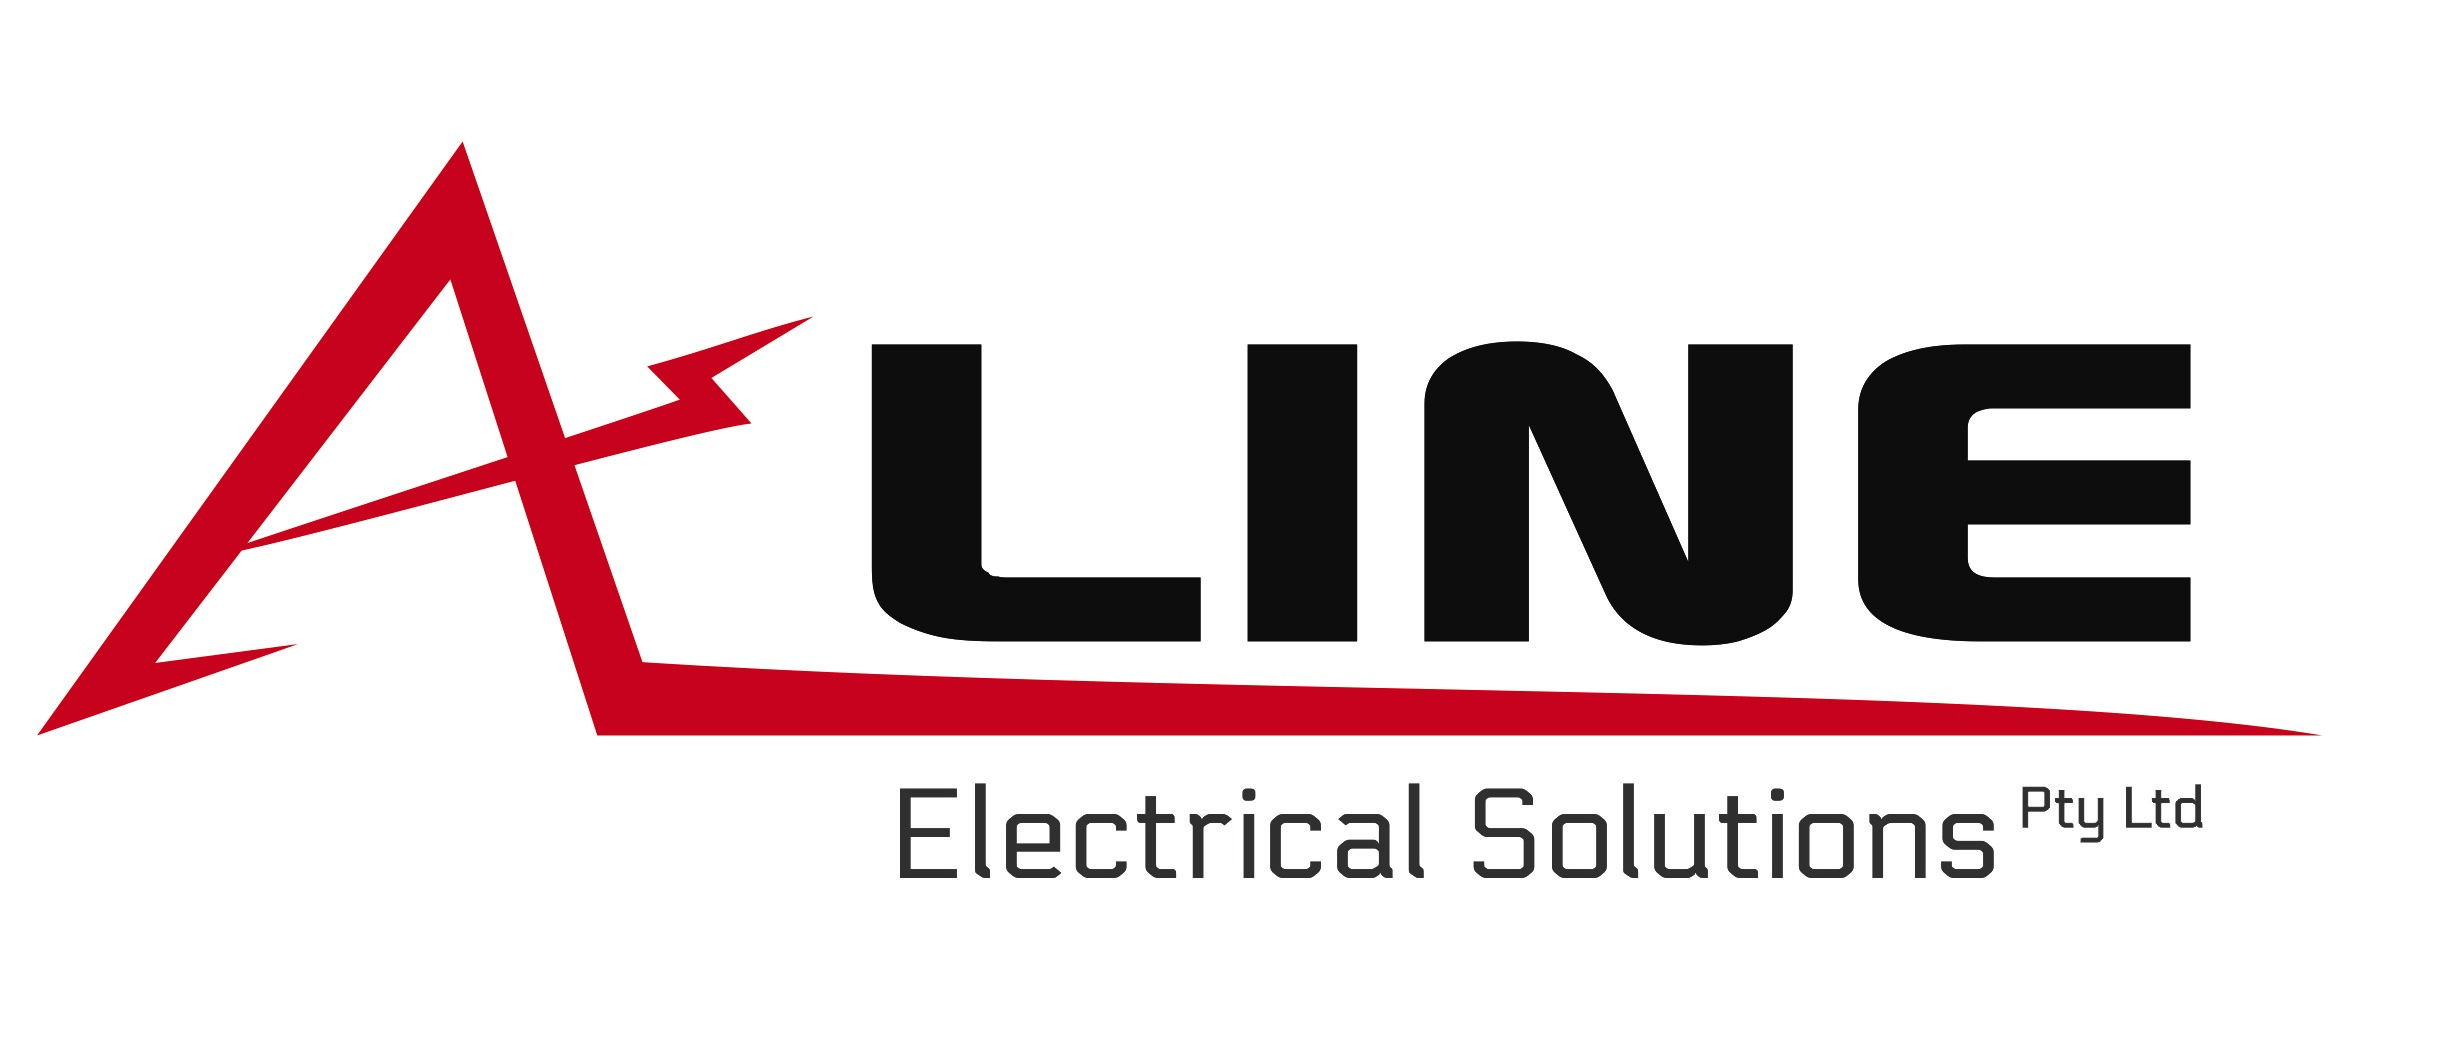 A-Line Electrical Solutions provides a full range of services to its clients in Government, Commercial and Private sector in facilities repairs and maintenance, new construction, extensions / refurbishments and electrical repairs and faults.